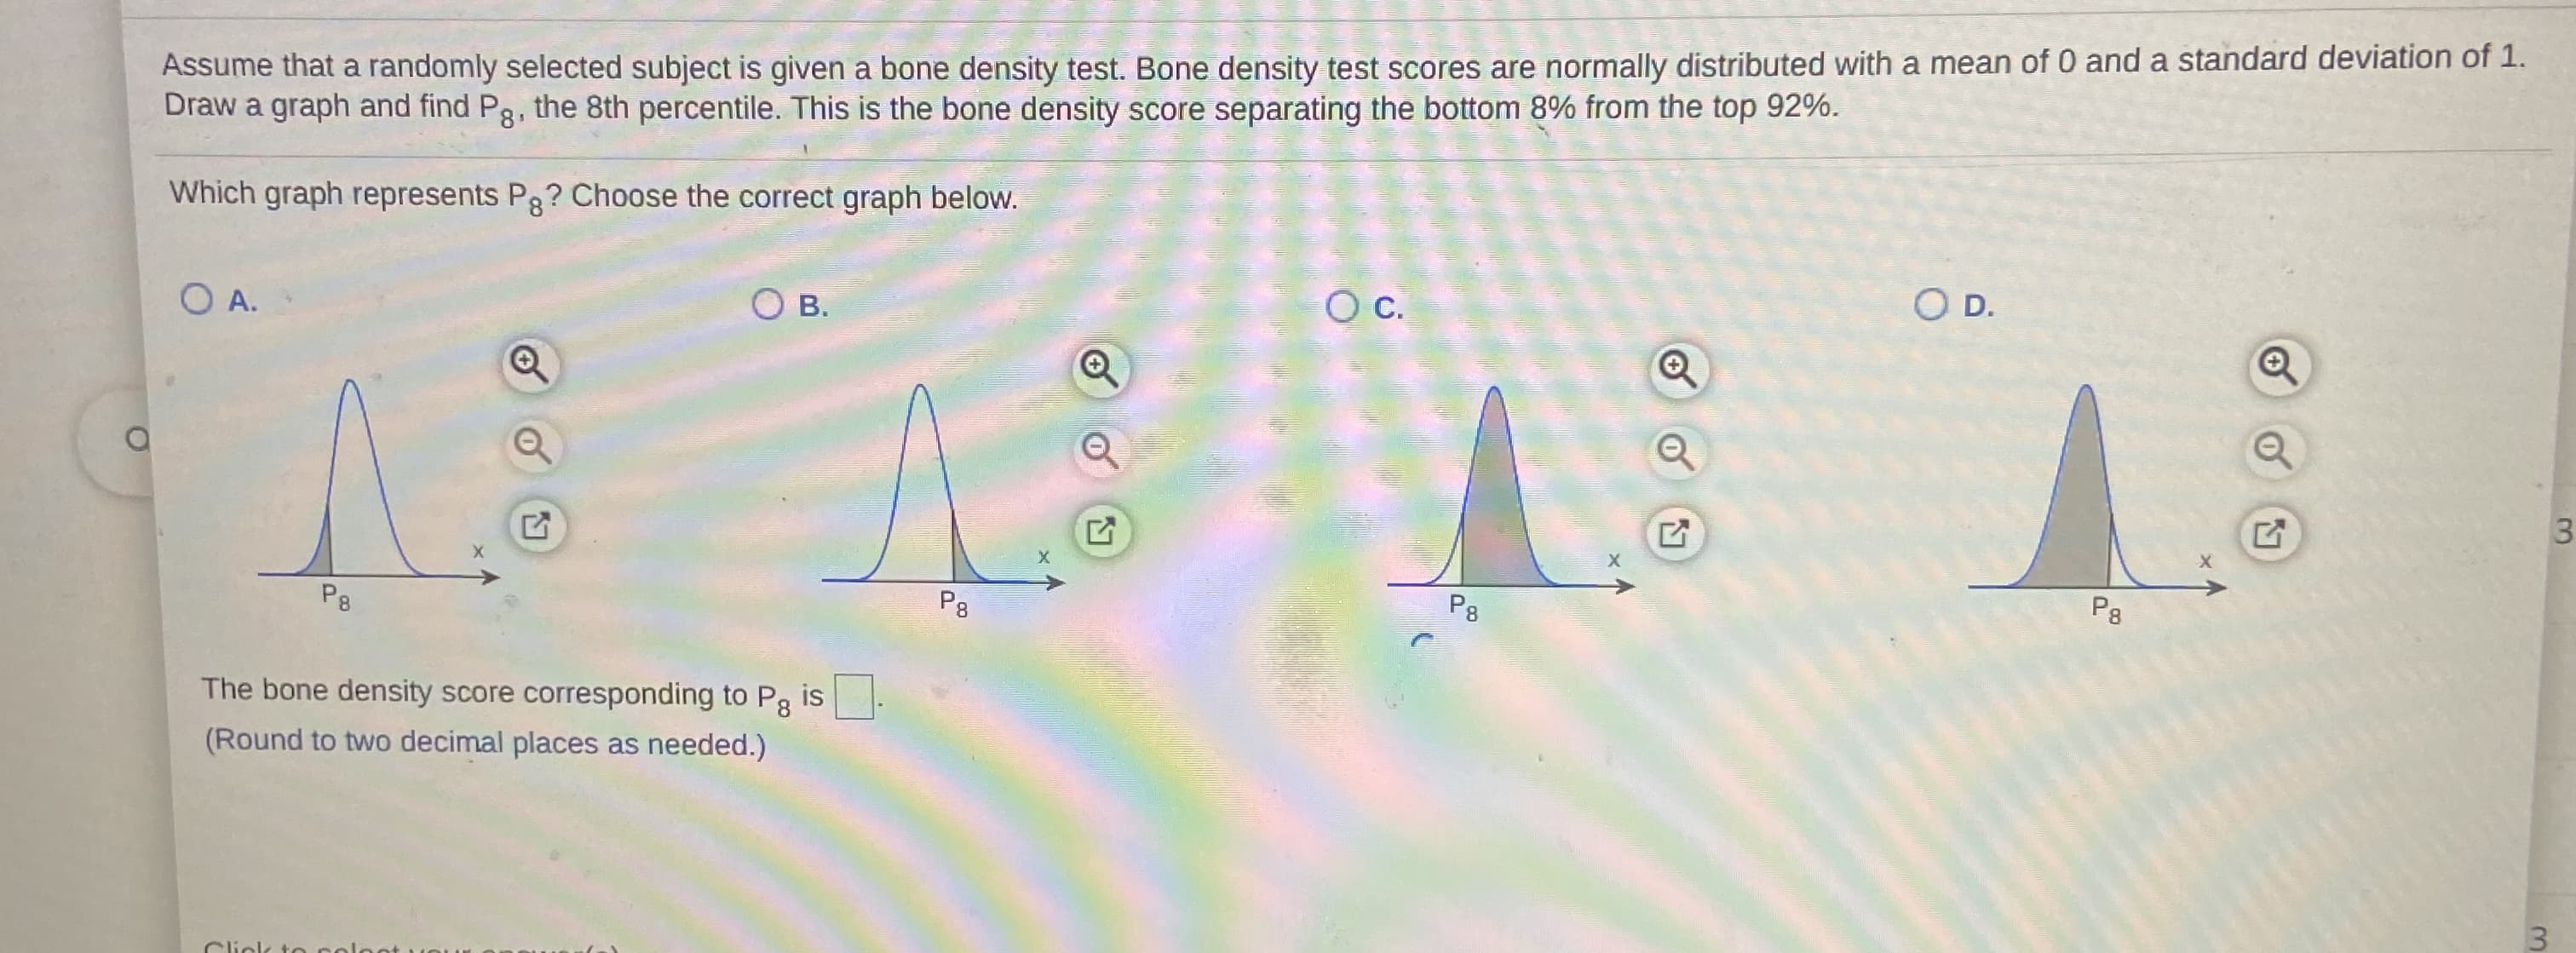 Assume that a randomly selected subject is given a bone density test. Bone density test scores are normally distributed with a mean of 0 and a standard deviation of 1.
Draw a graph and find Pg, the 8th percentile. This is the bone density score separating the bottom 8% from the top 92%.
Which graph represents Pg? Choose the correct graph below.
O D.
C.
О в.
O A.
P8
P8
P8
P8
The bone density score corresponding to Pg is-
(Round to two decimal places as needed.)
Click to
3.
3.
